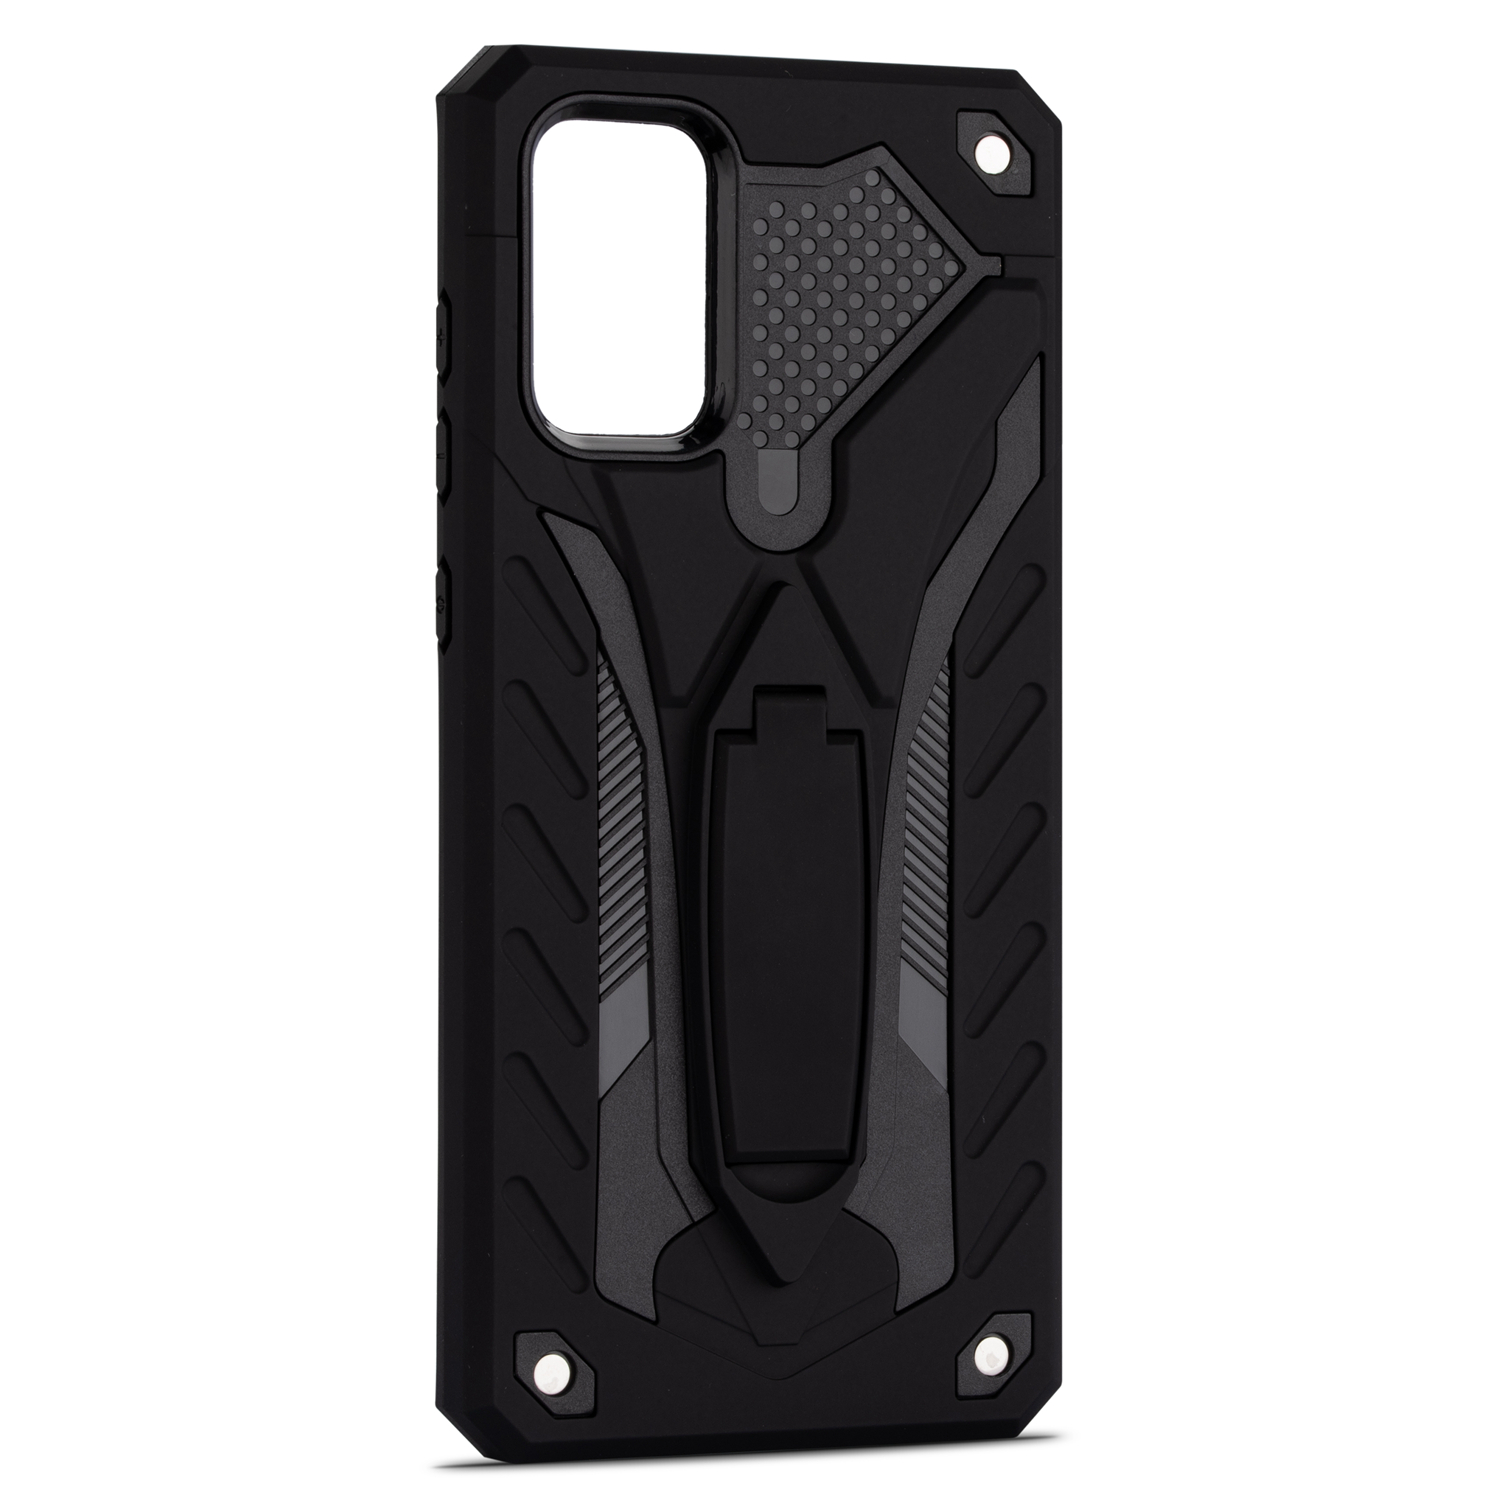 Bakeey for Xiaomi Redmi 9A Case Armor Shockproof Anti-Fingerprint with Ring Bracket Stand PC + TPU Protective Case Non-original